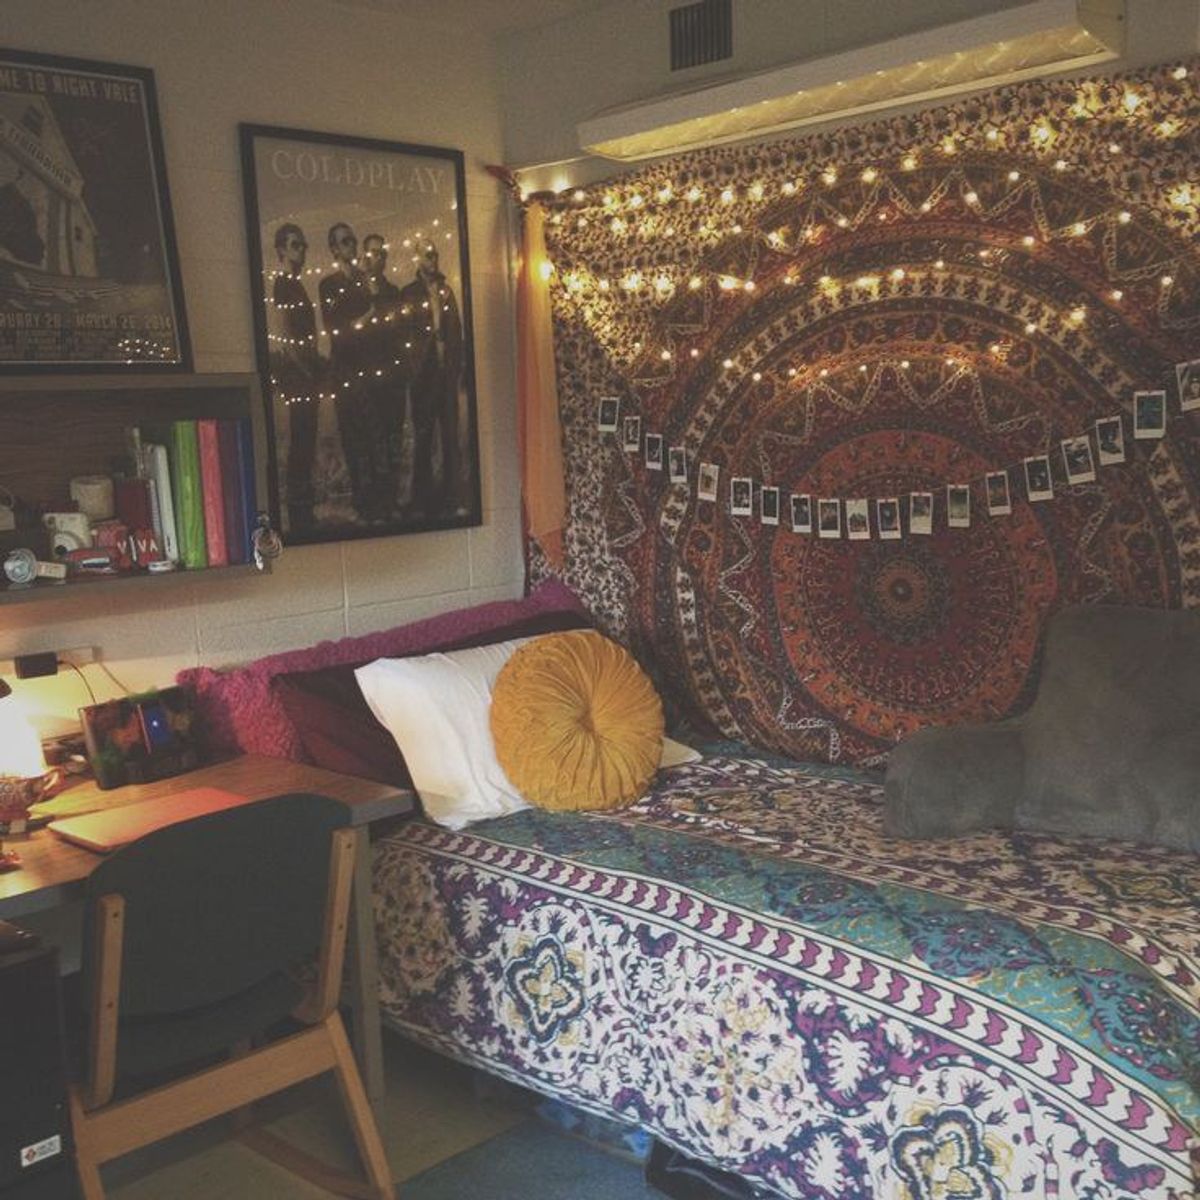 Making the Most of Your Dorm Room